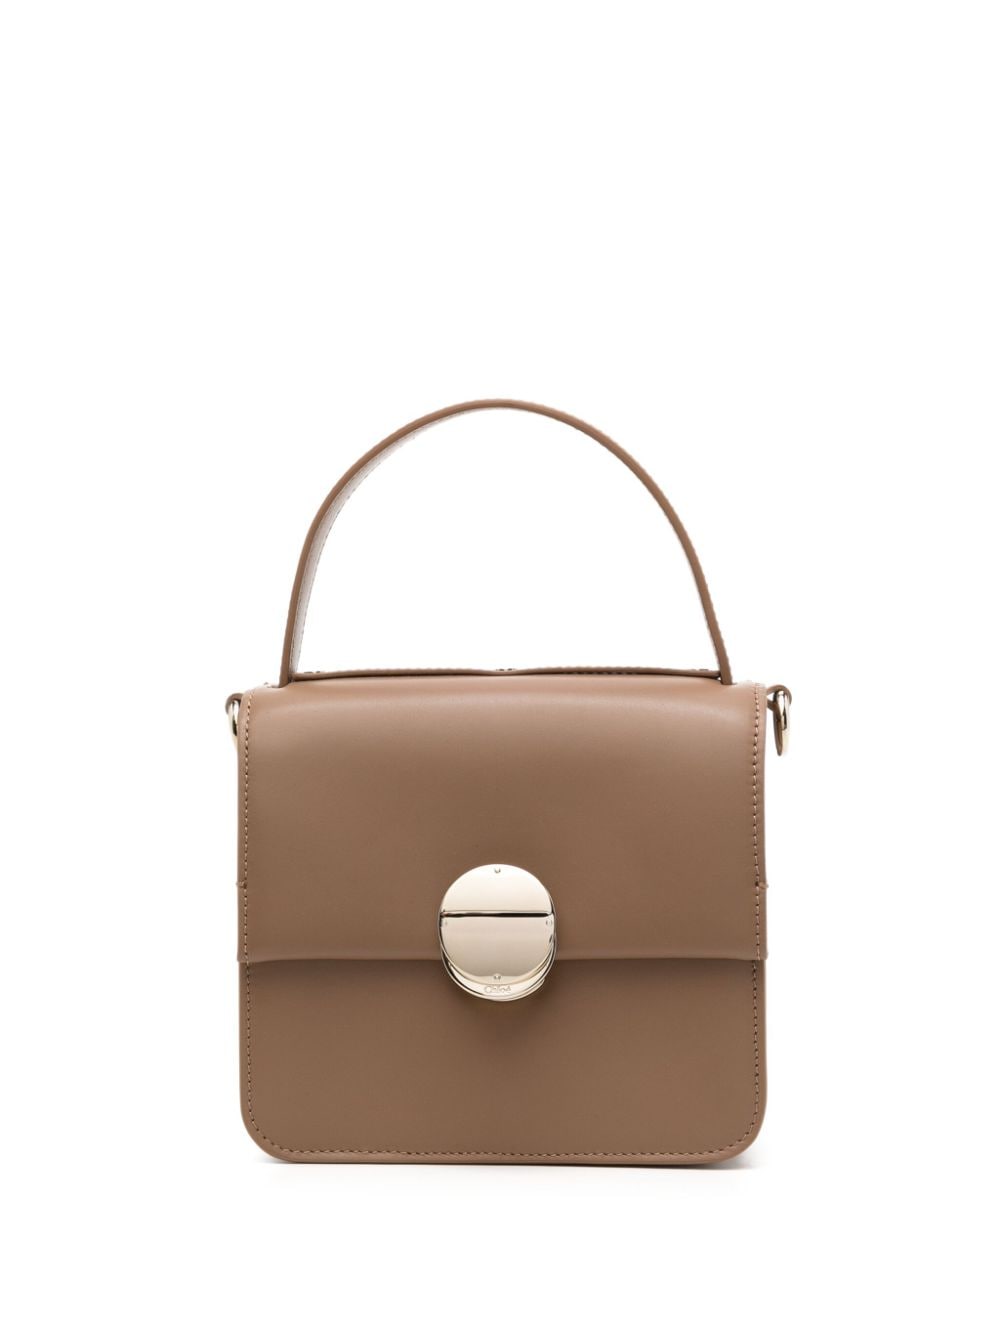 Chloé small Penelope leather tote bag - Brown von Chloé